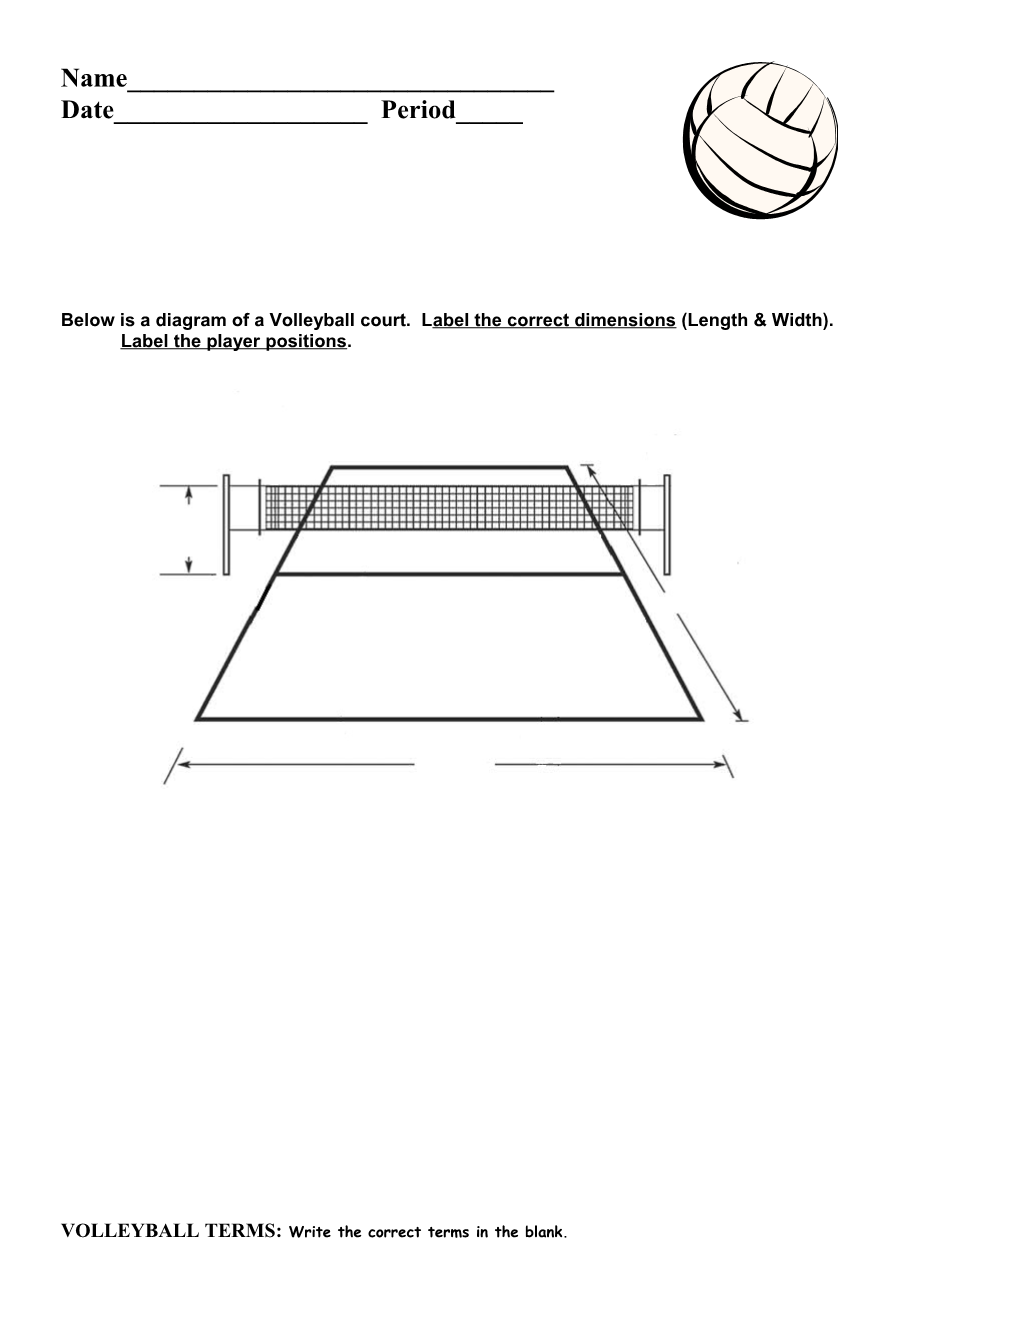 Below Is a Diagram of a Volleyball Court. Label the Correct Dimensions (Length & Width)